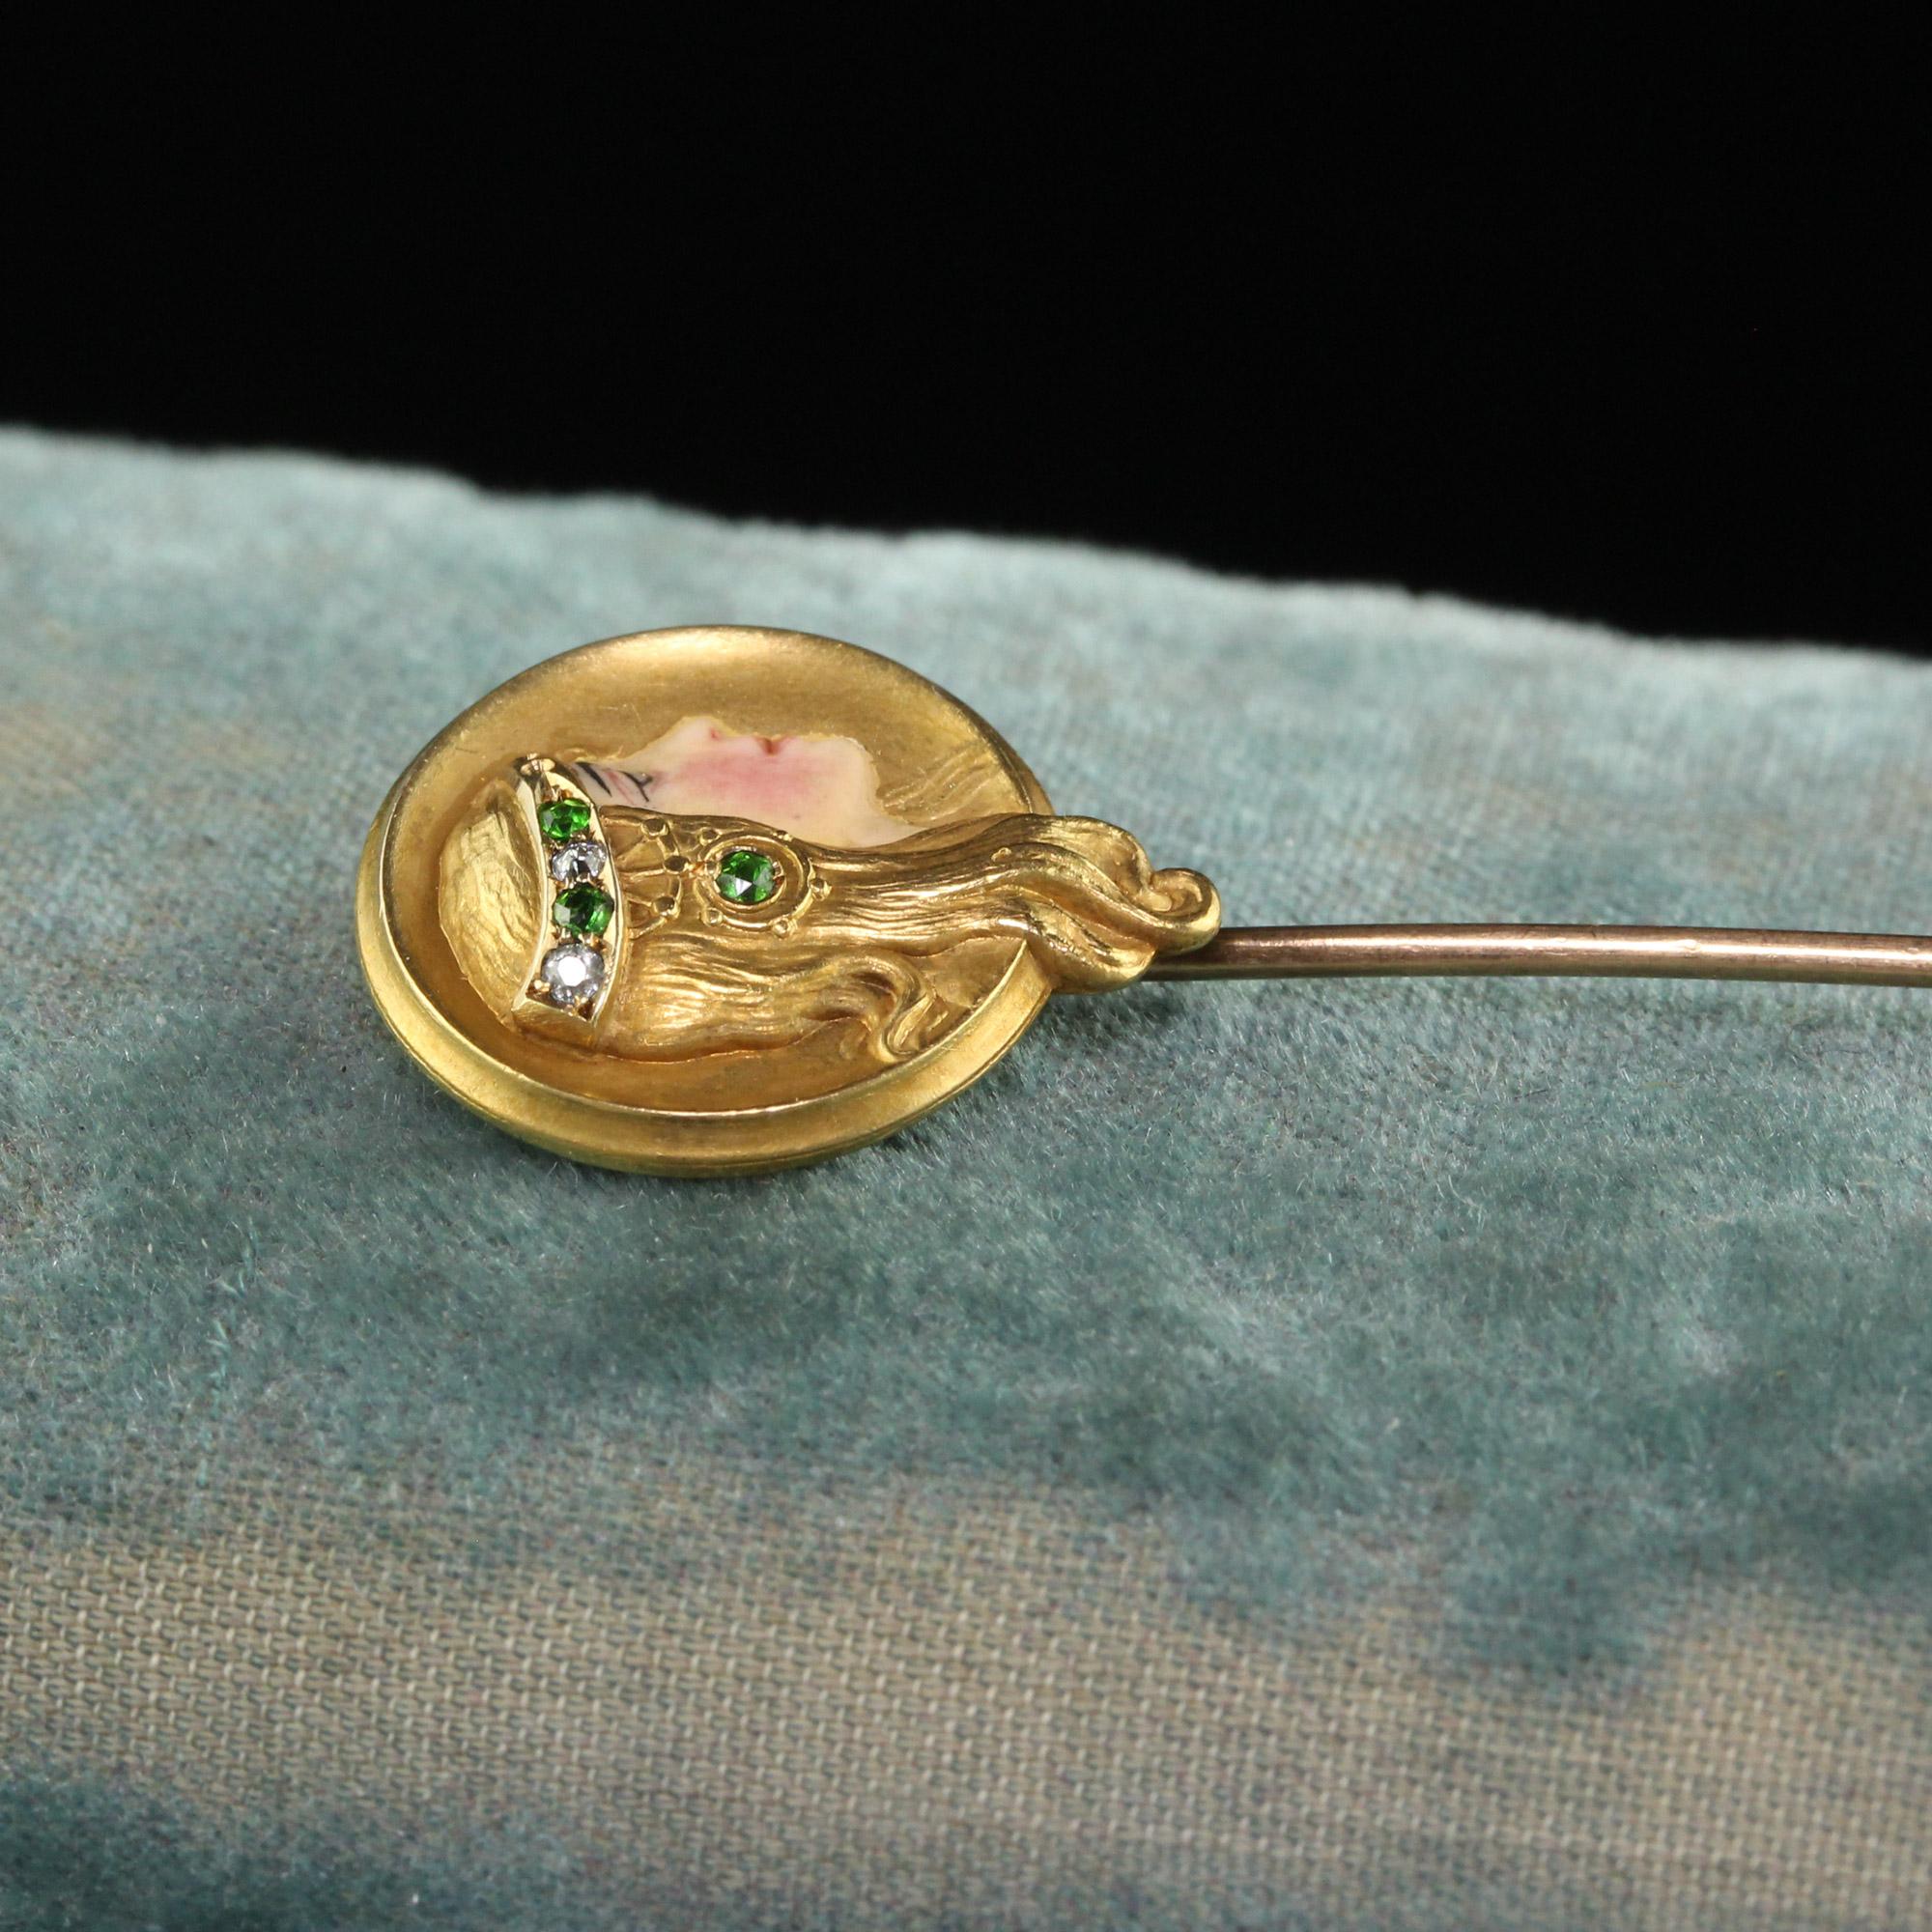 Antique Art Nouveau 14K Yellow Gold Diamond Demantoid Enamel Lady Stick Pin In Good Condition For Sale In Great Neck, NY